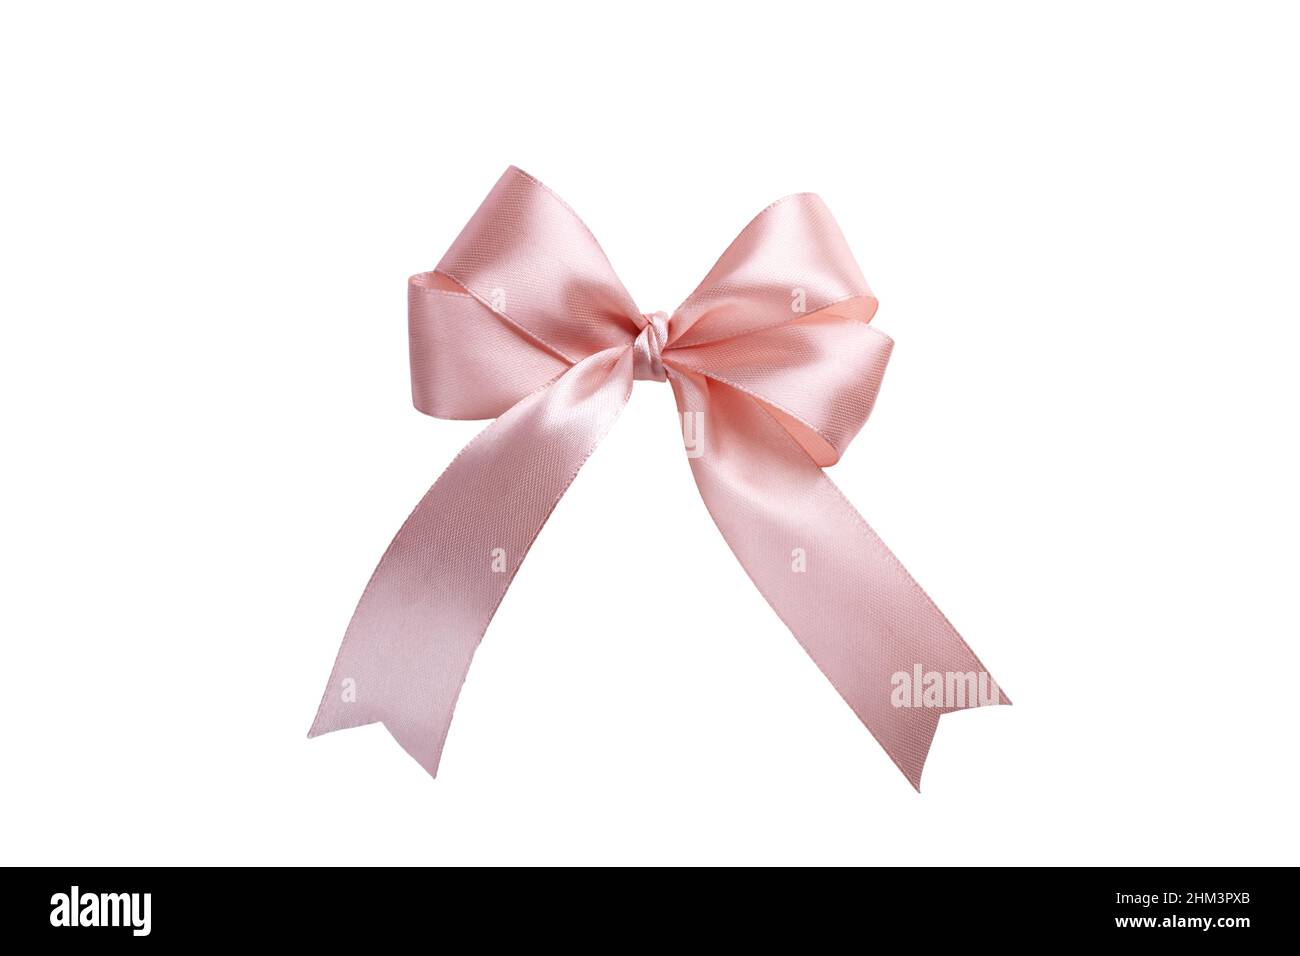 Pink bow isolated on white background. Satin ribbon product for gift decoration Stock Photo